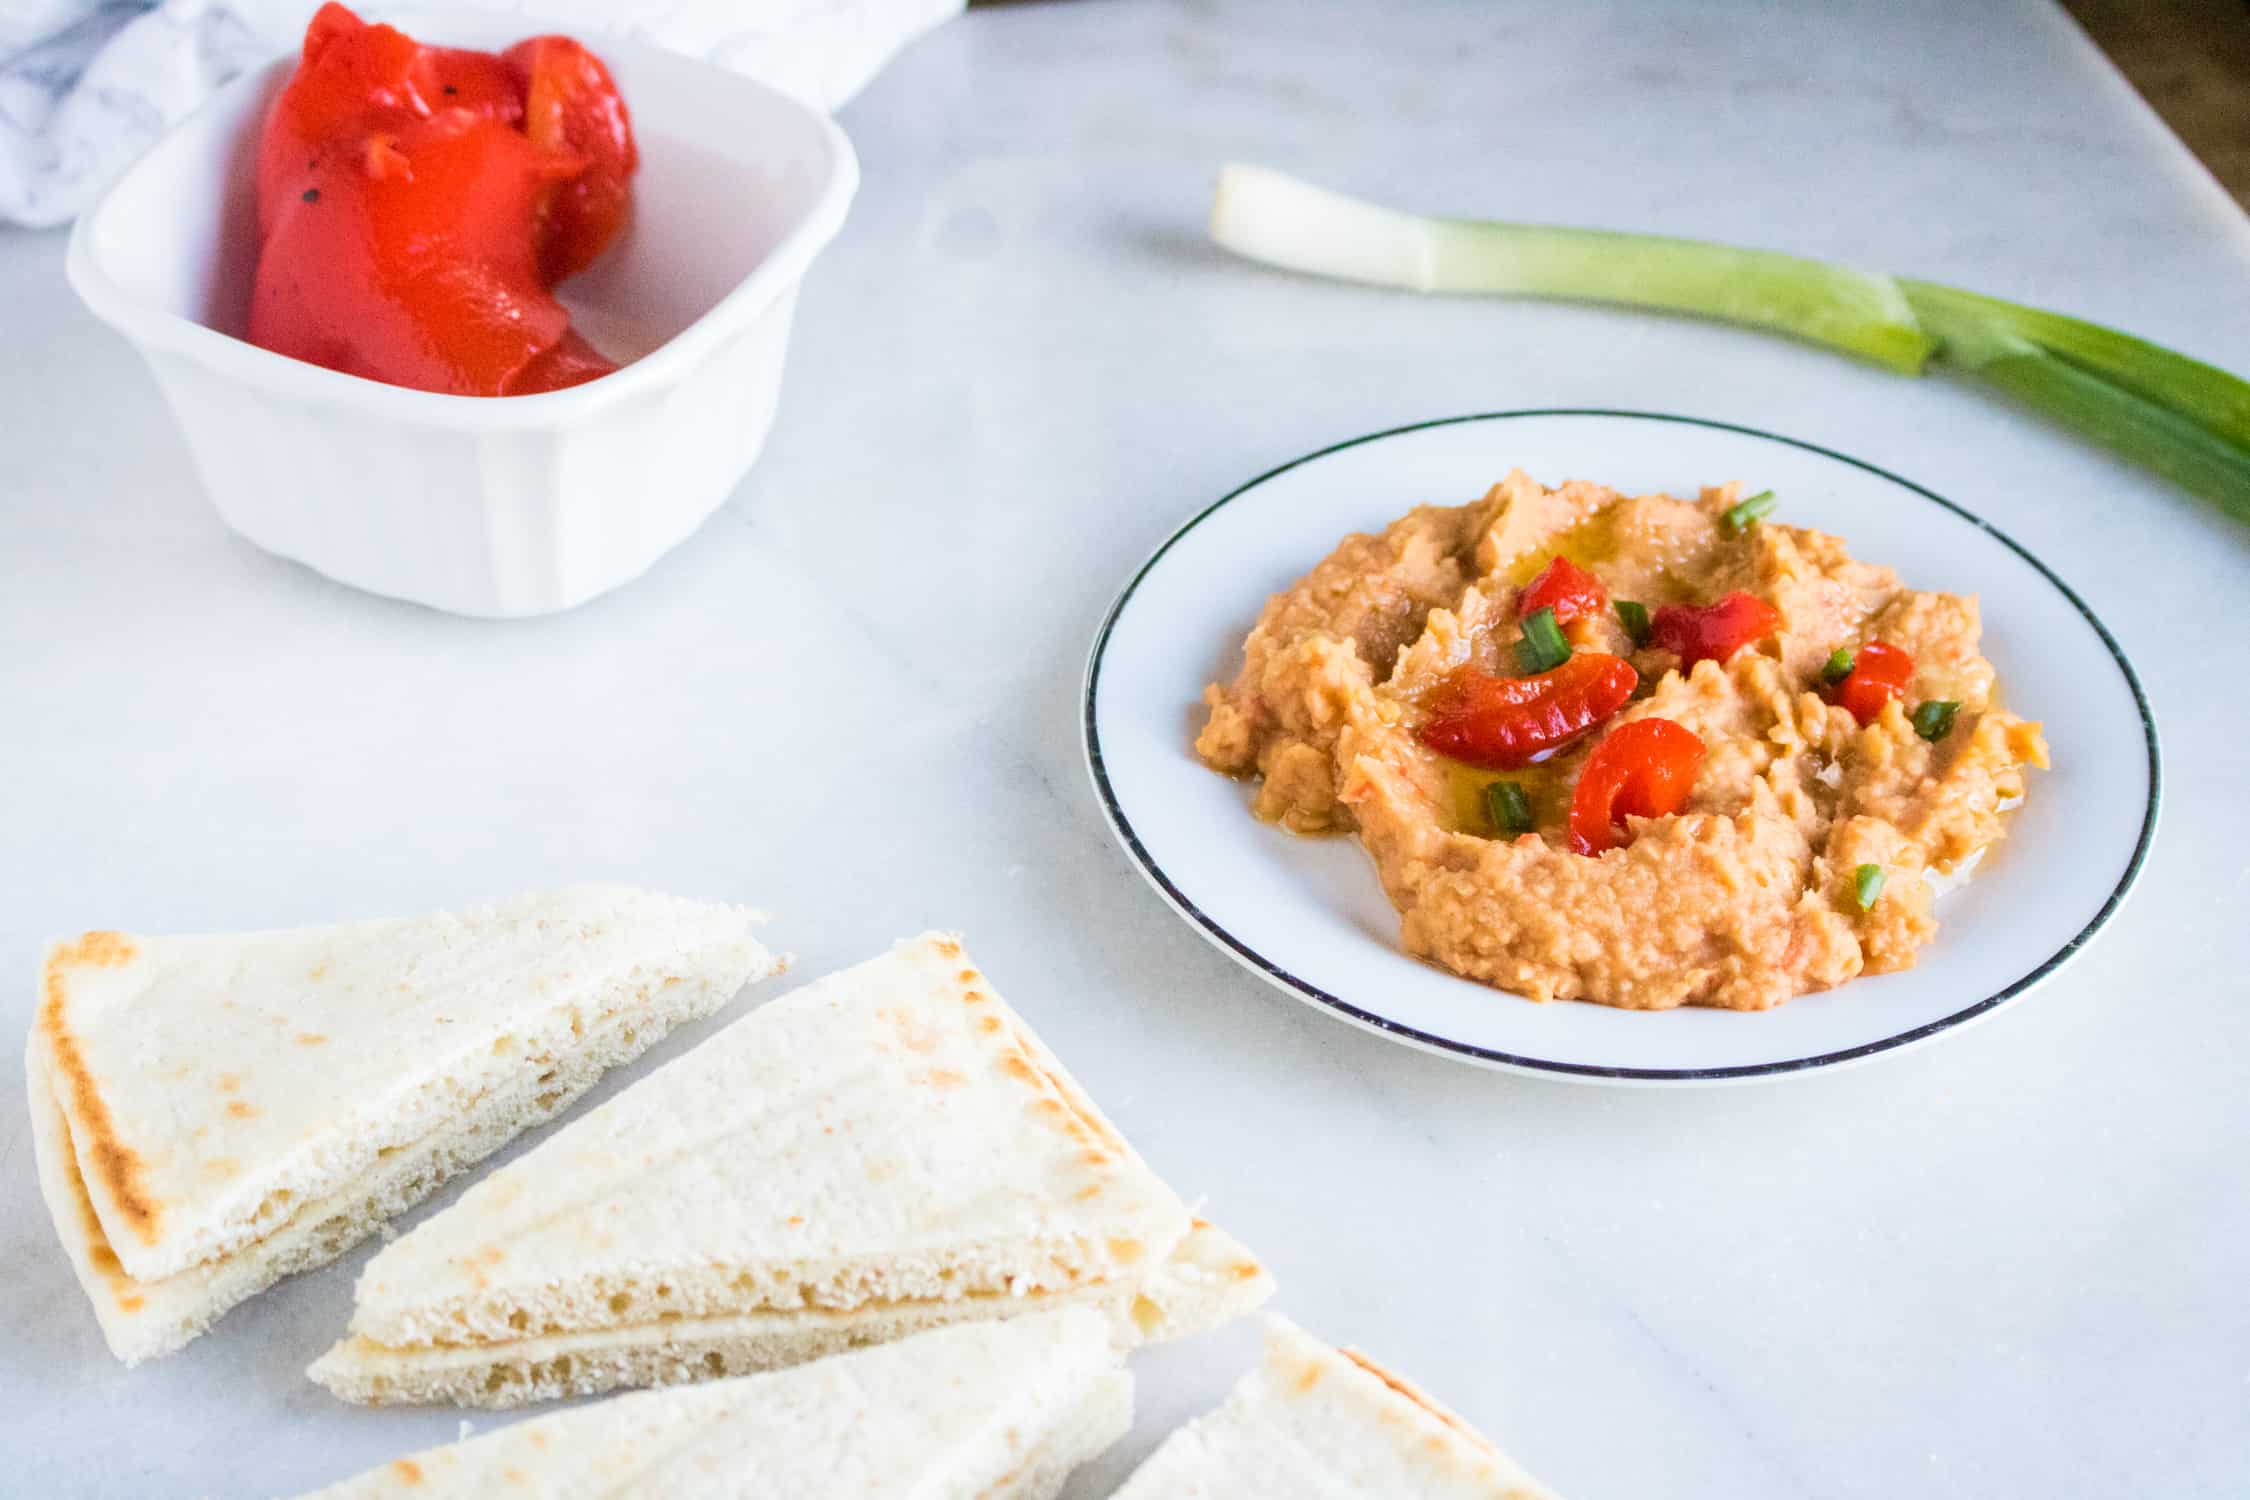 white ceramic dish in background with whole roasted red pepper in it. sliced triangles of pita bread in foreground sitting next to white bowl with Roasted Red Pepper Hummus in it with green onion laying behind